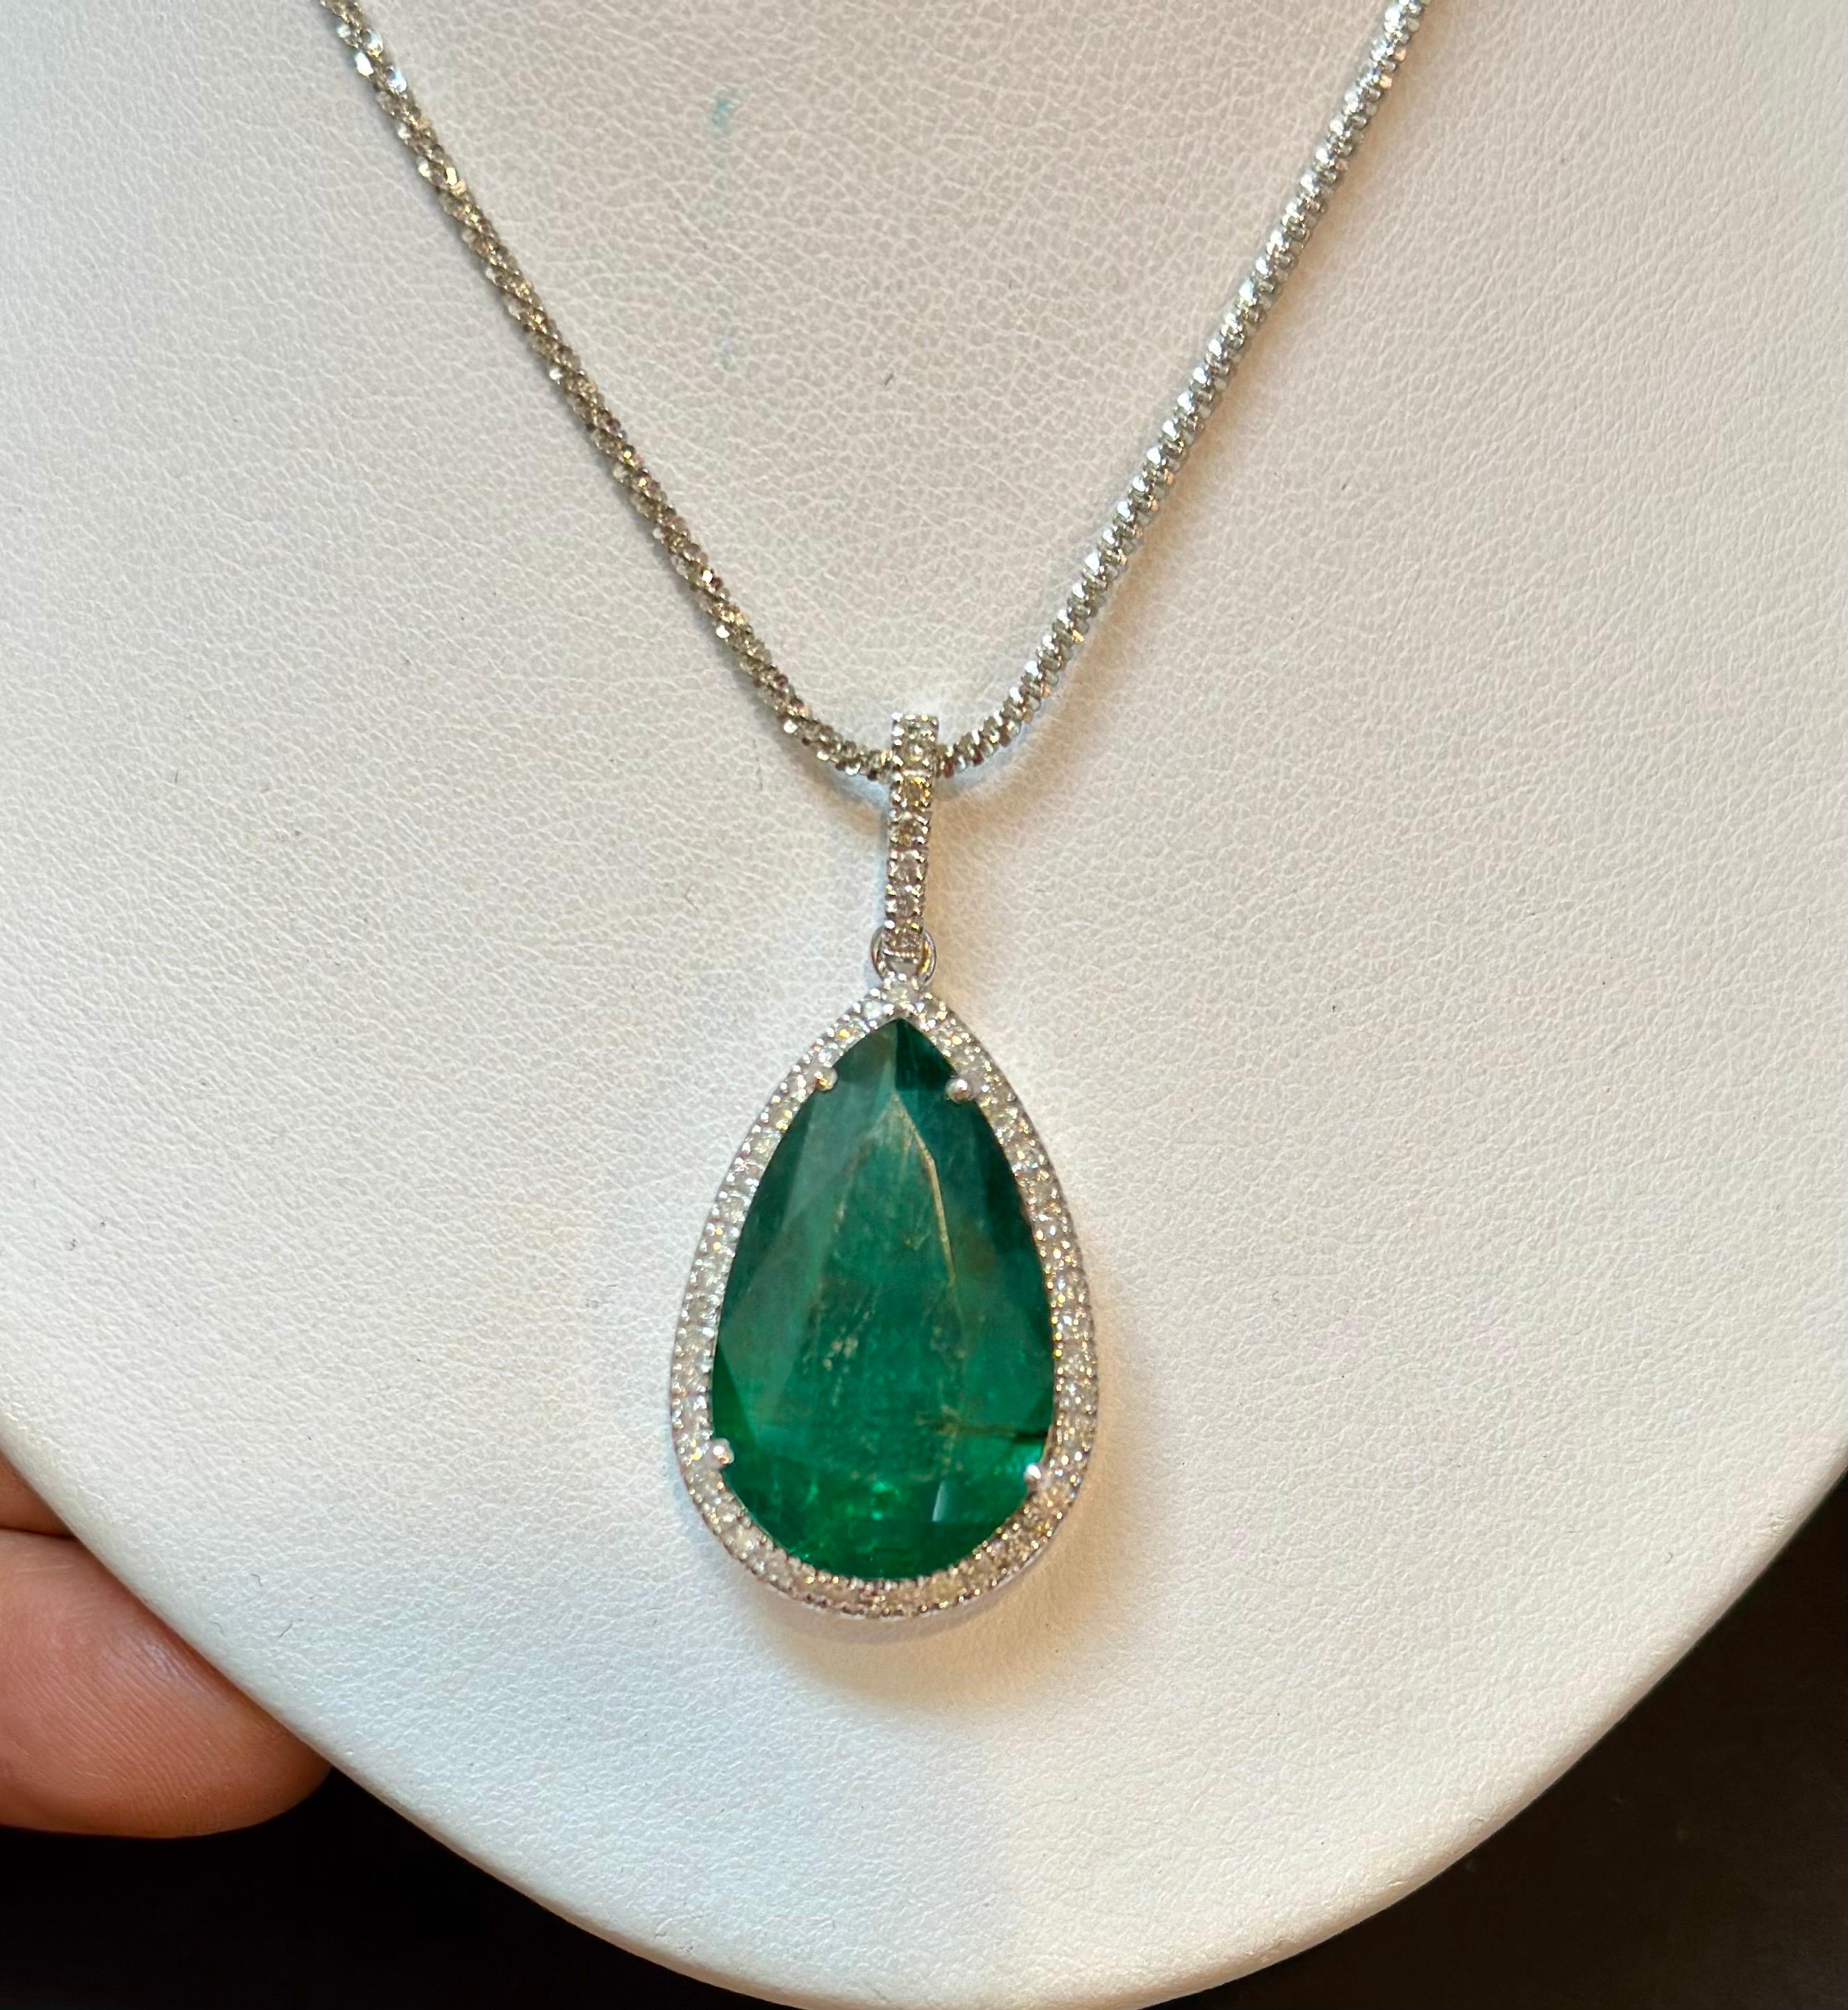 19 Ct Pear Cut Emerald & 1 Ct Diamond Halo Pendent/Necklace 14 KW Gold Chain For Sale 7